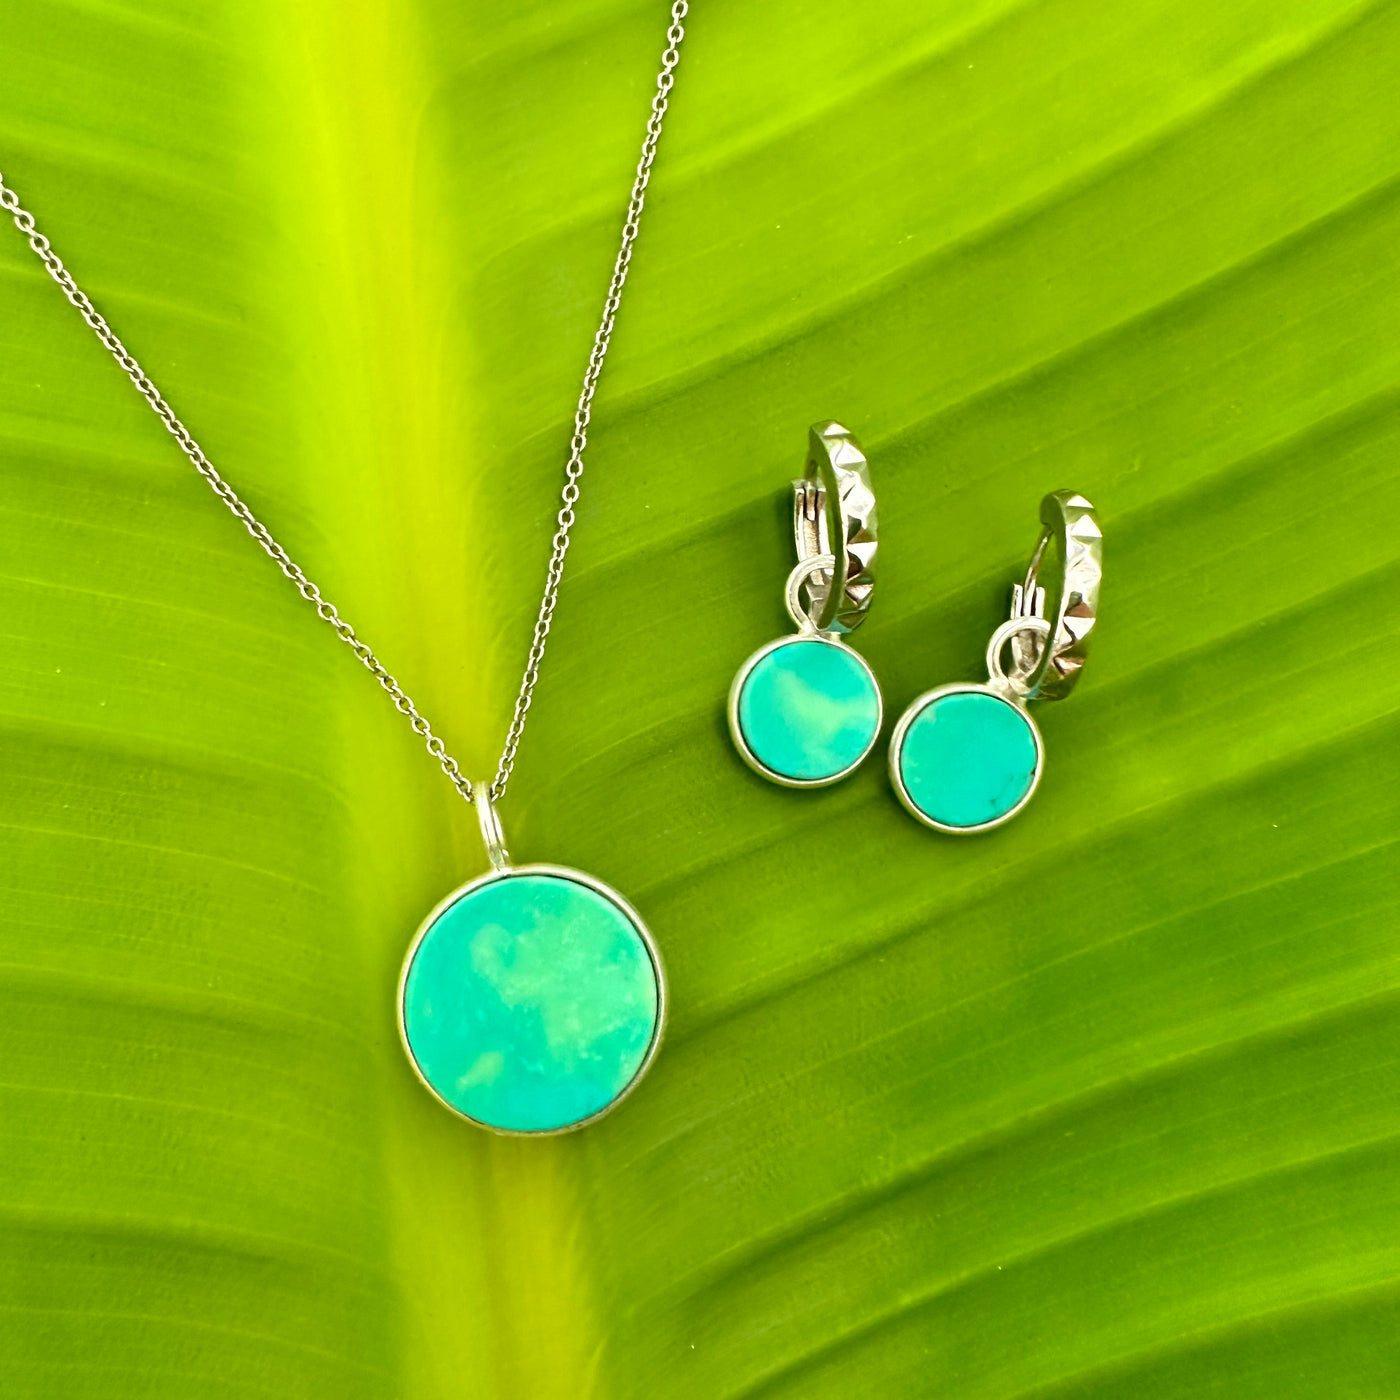 The Circle Turquoise December Birthstone Necklace | Wellbeing & Good Fortune